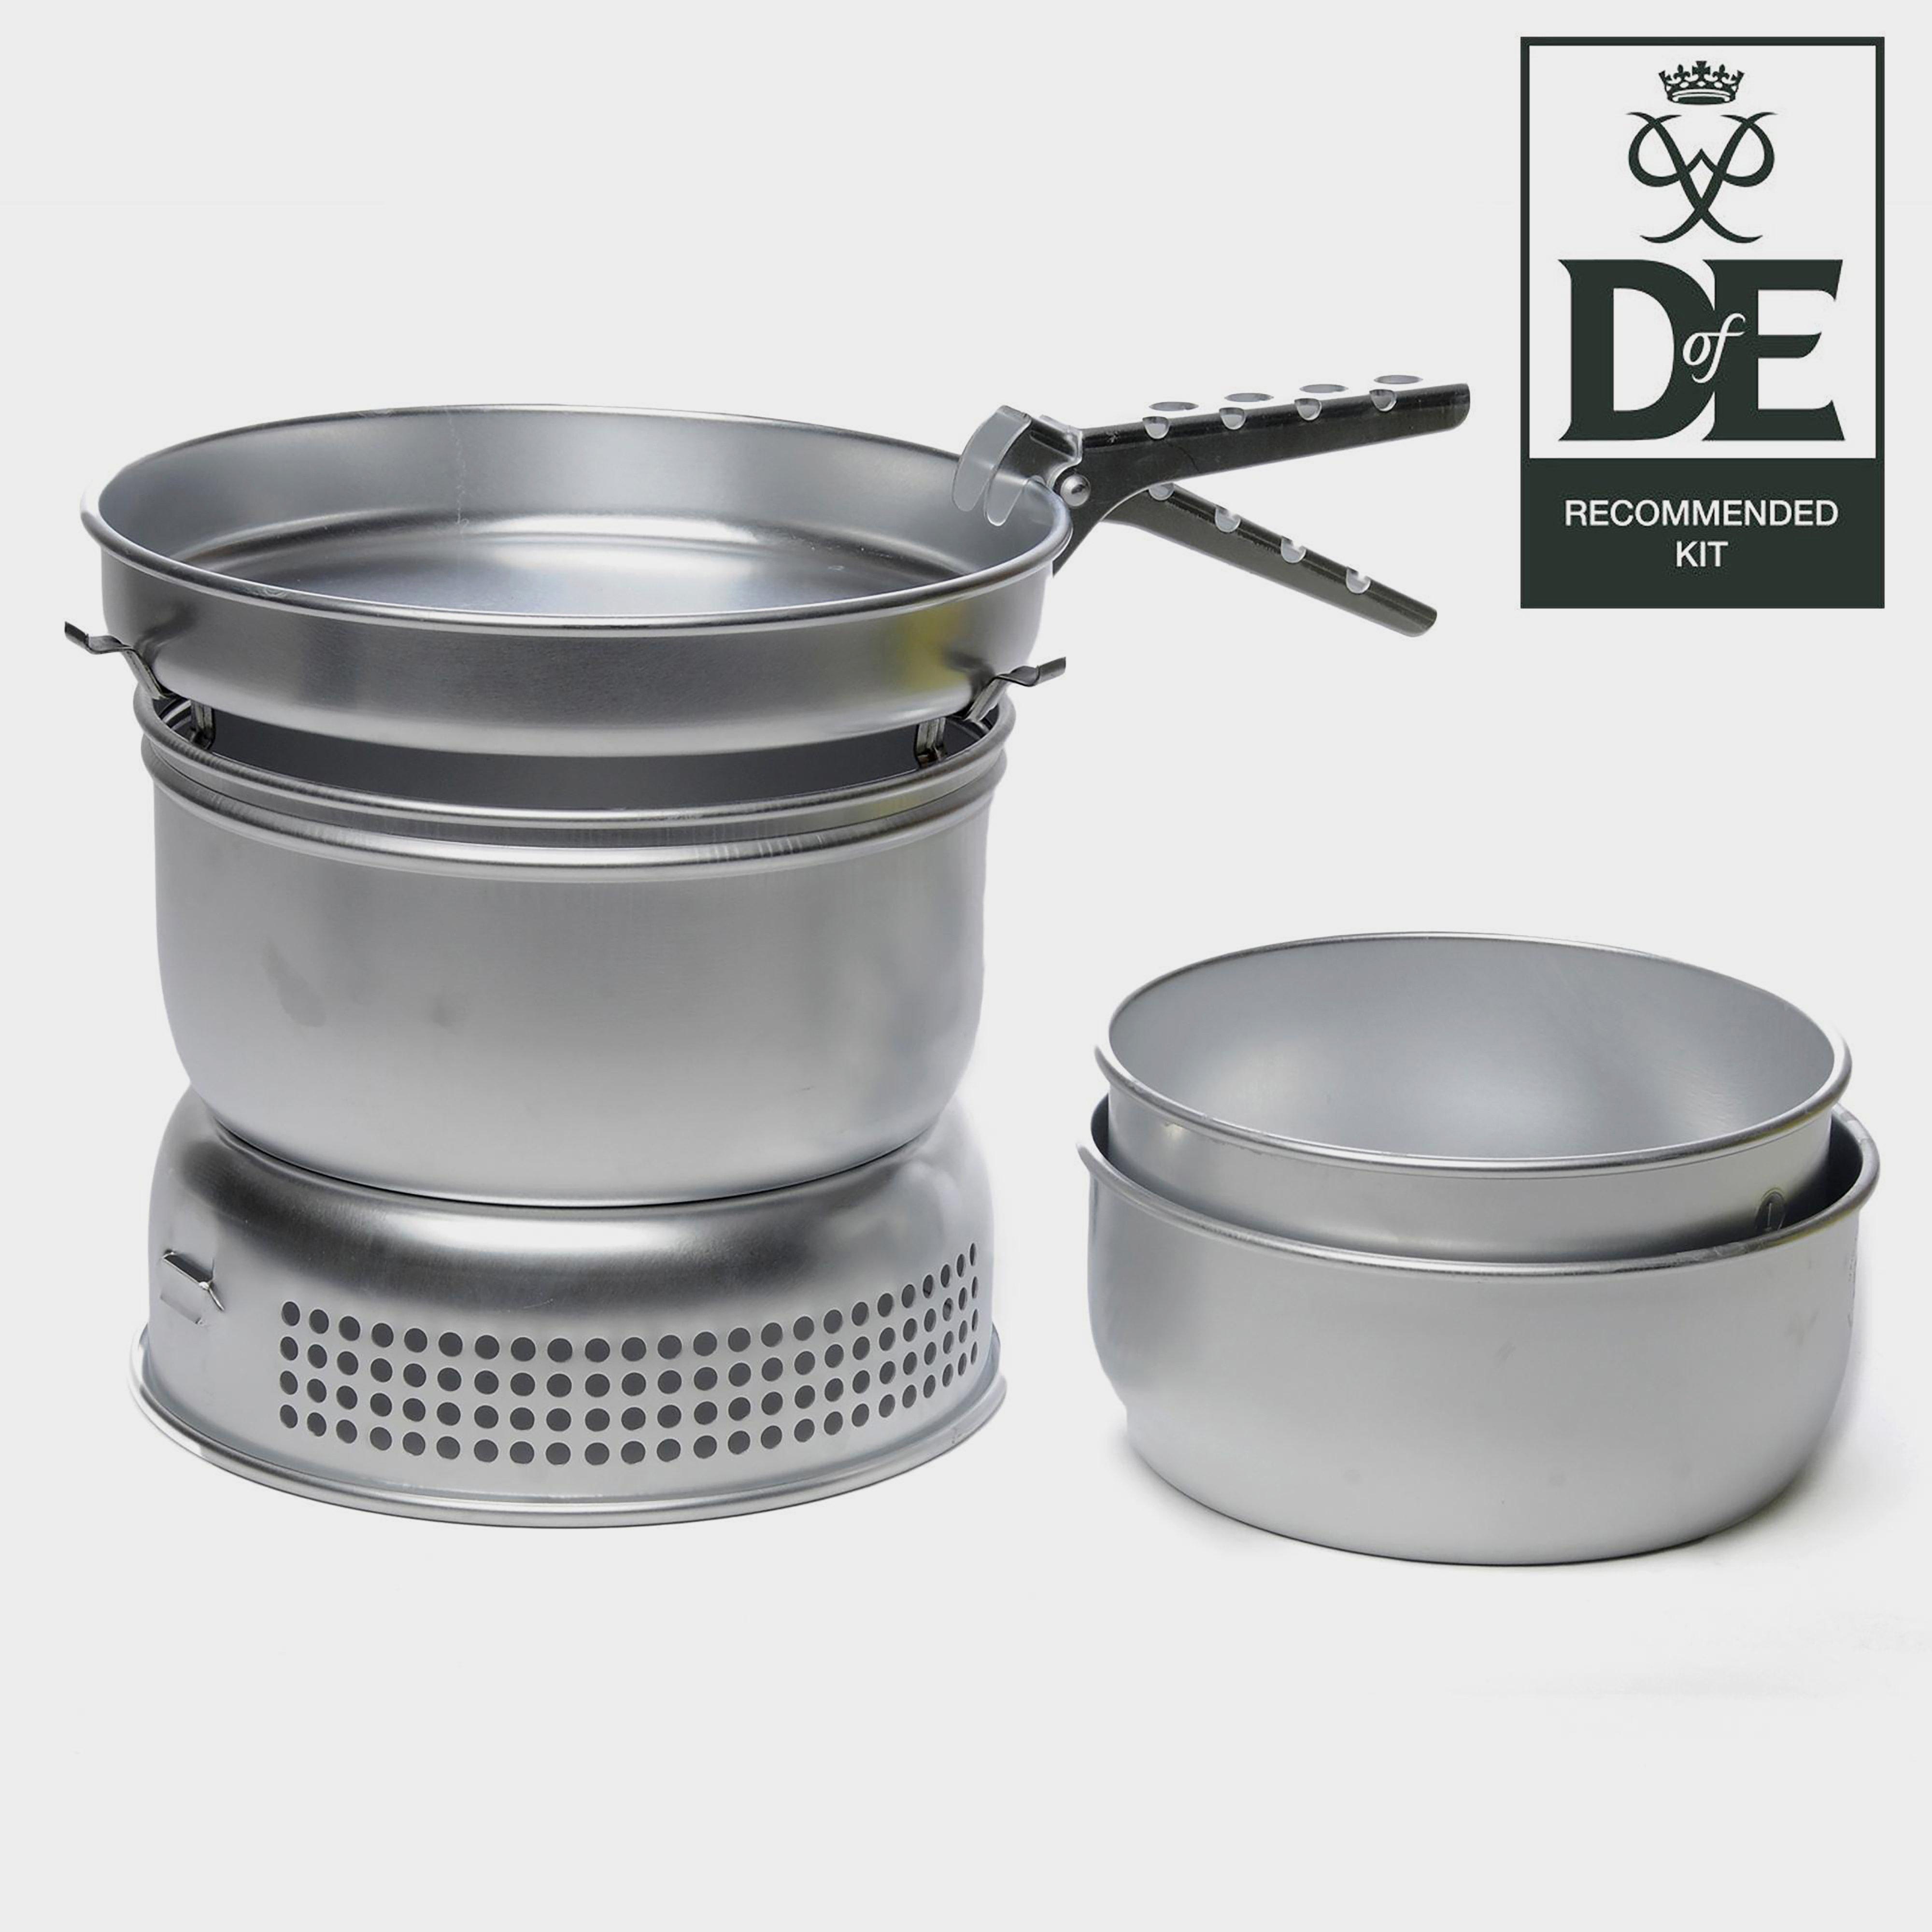 25-1 Cooking System (3-4 Person) - Silver, Silver